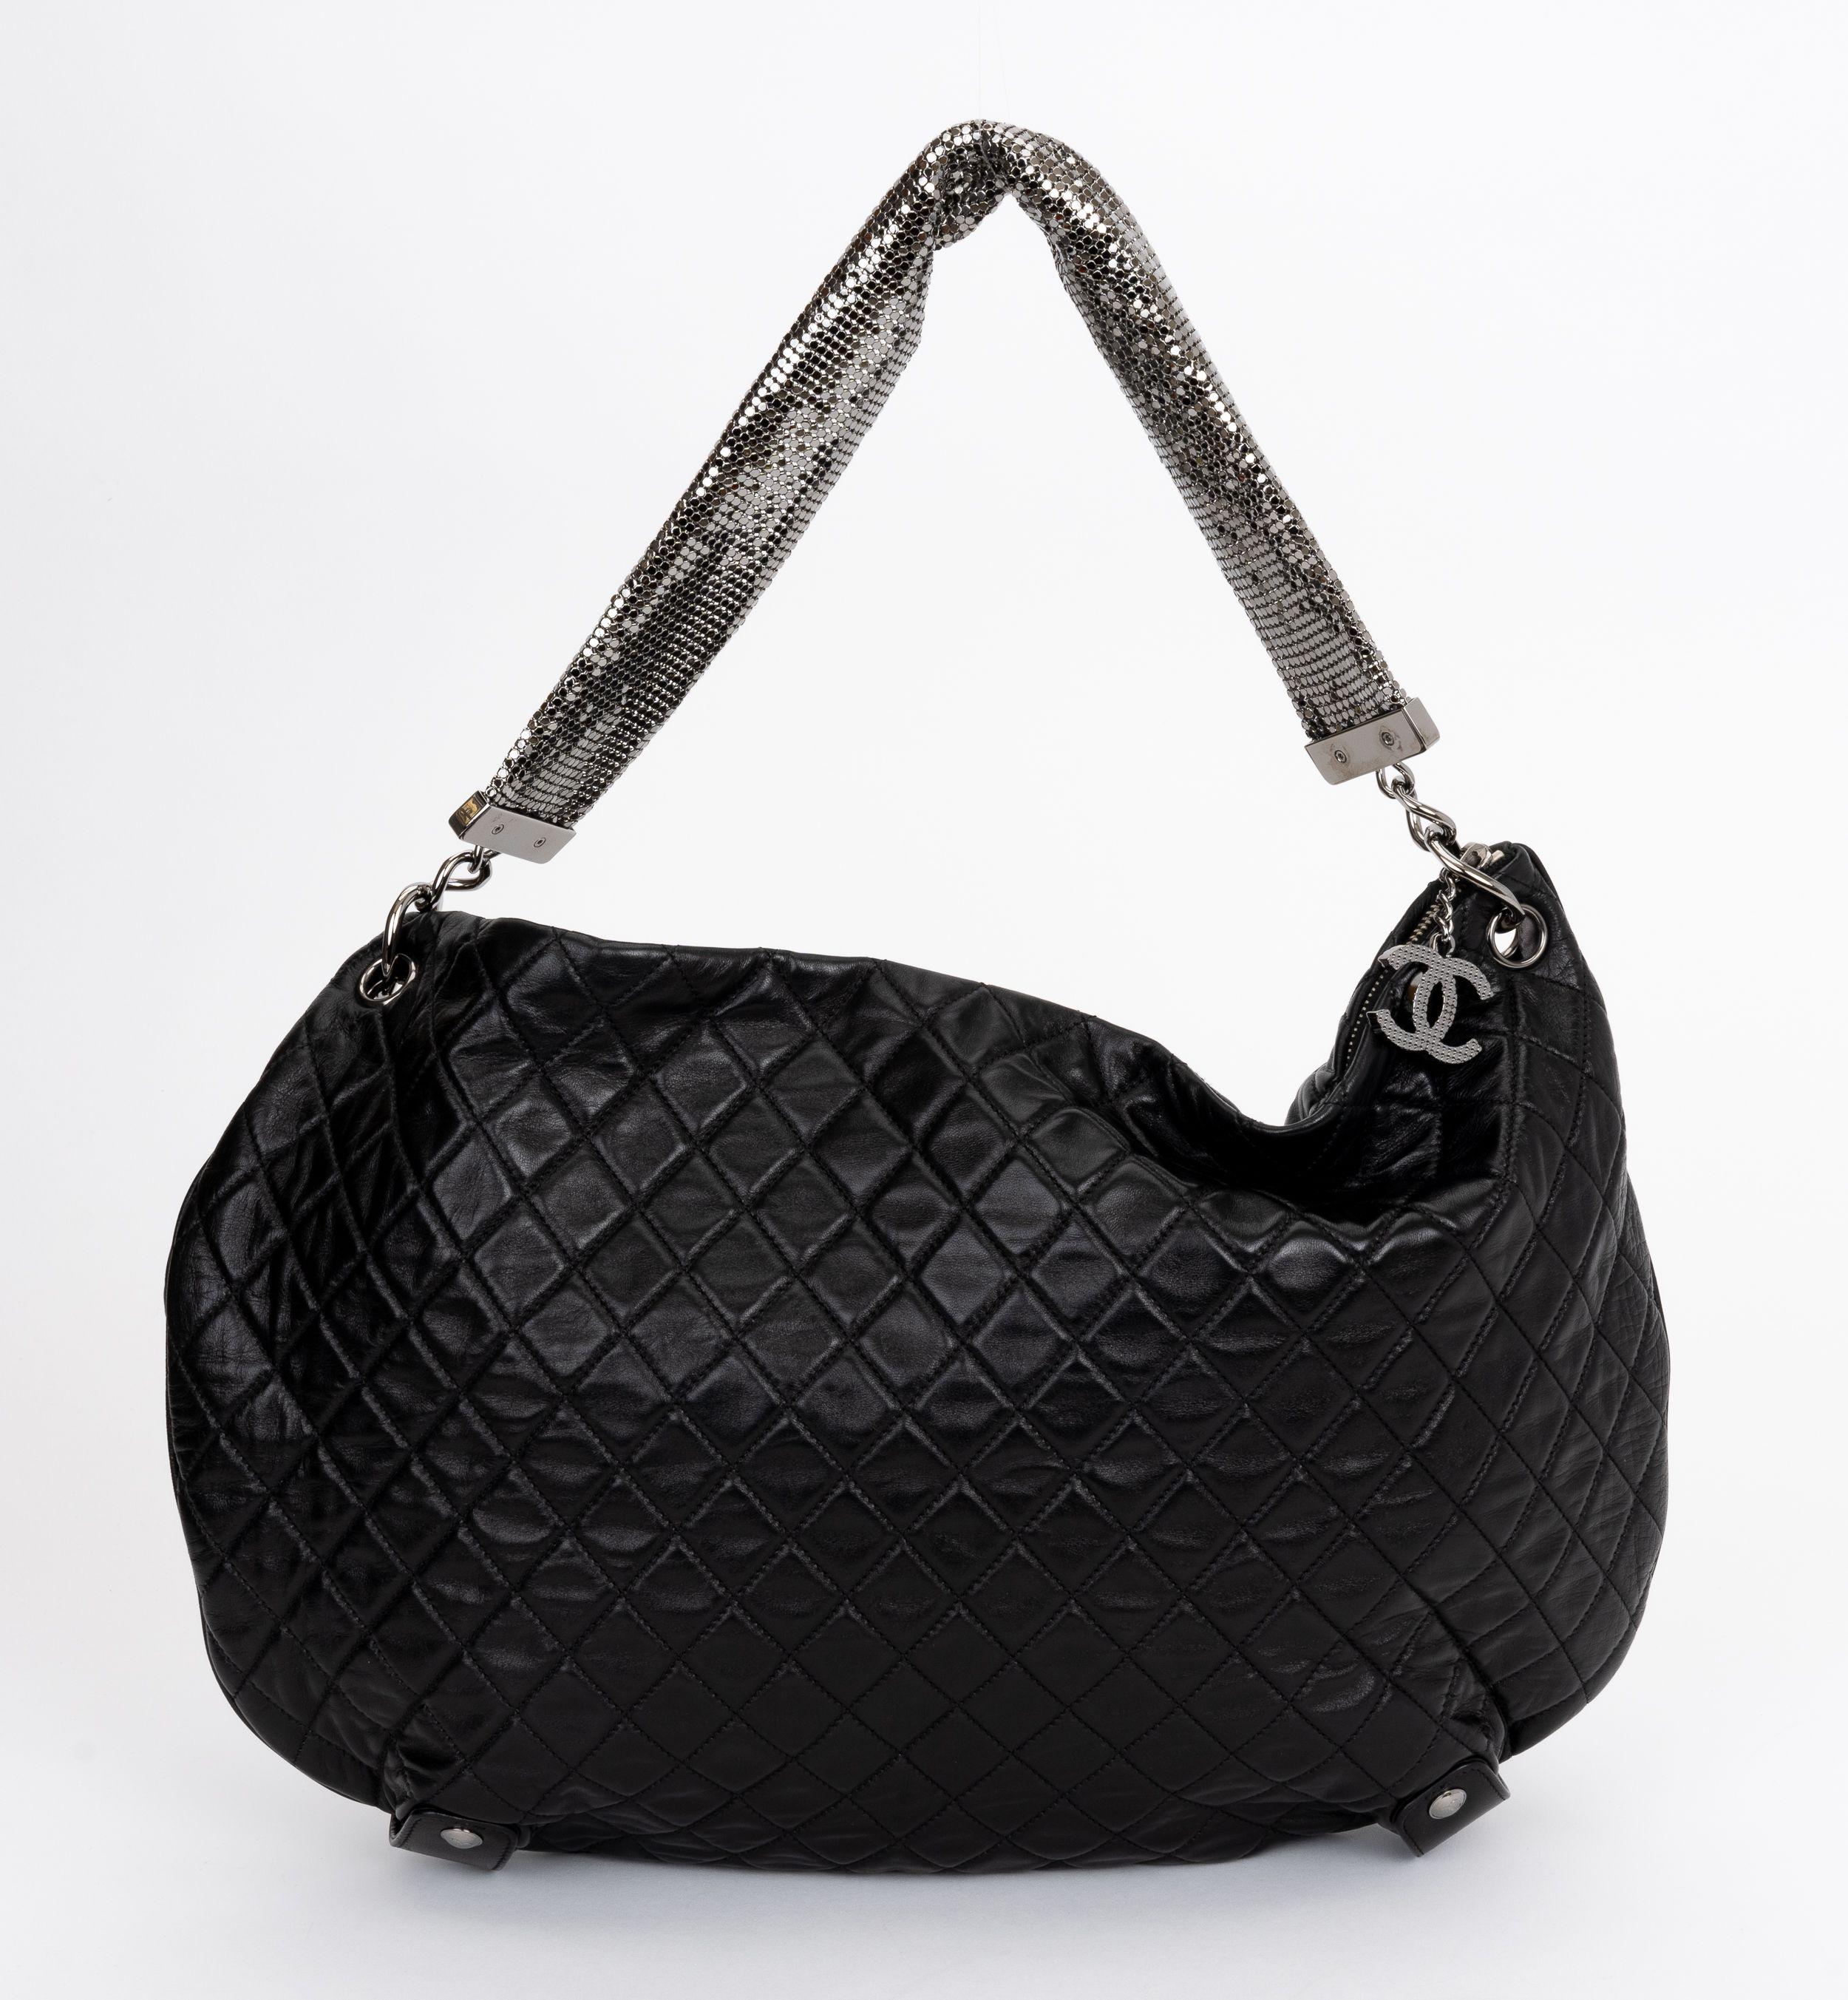 Women's Chanel Black Mesh Chain Mail Bag For Sale